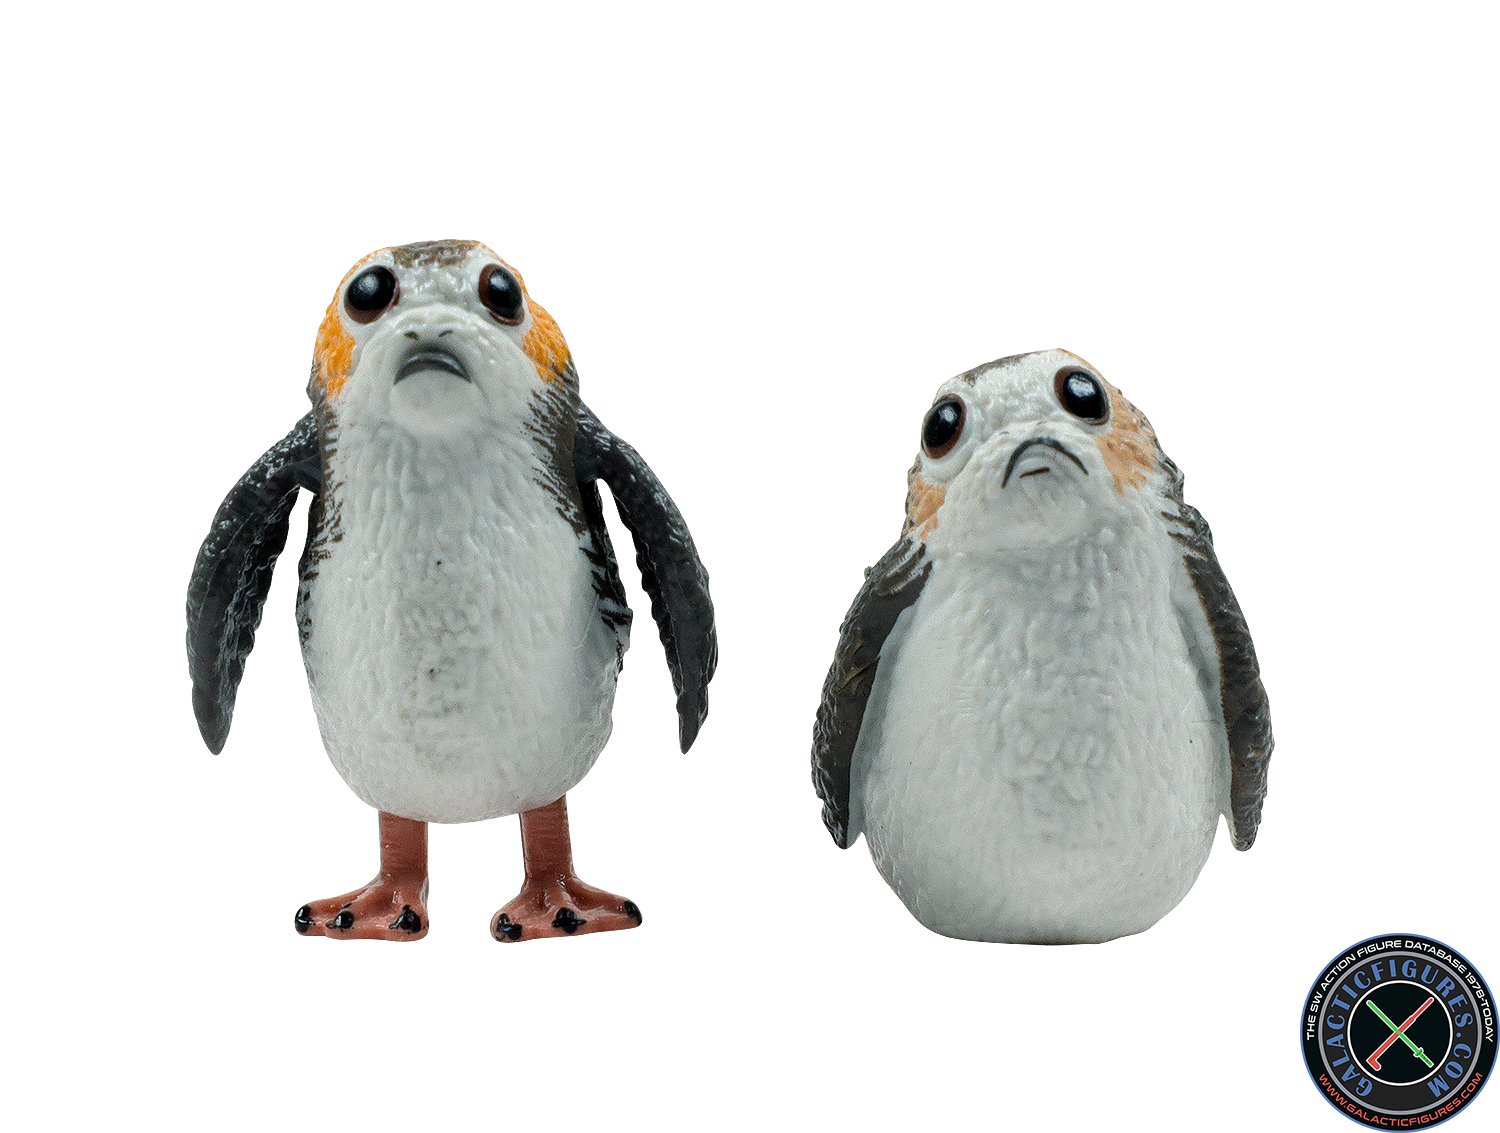 Porg Galactic Creatures 6-Pack